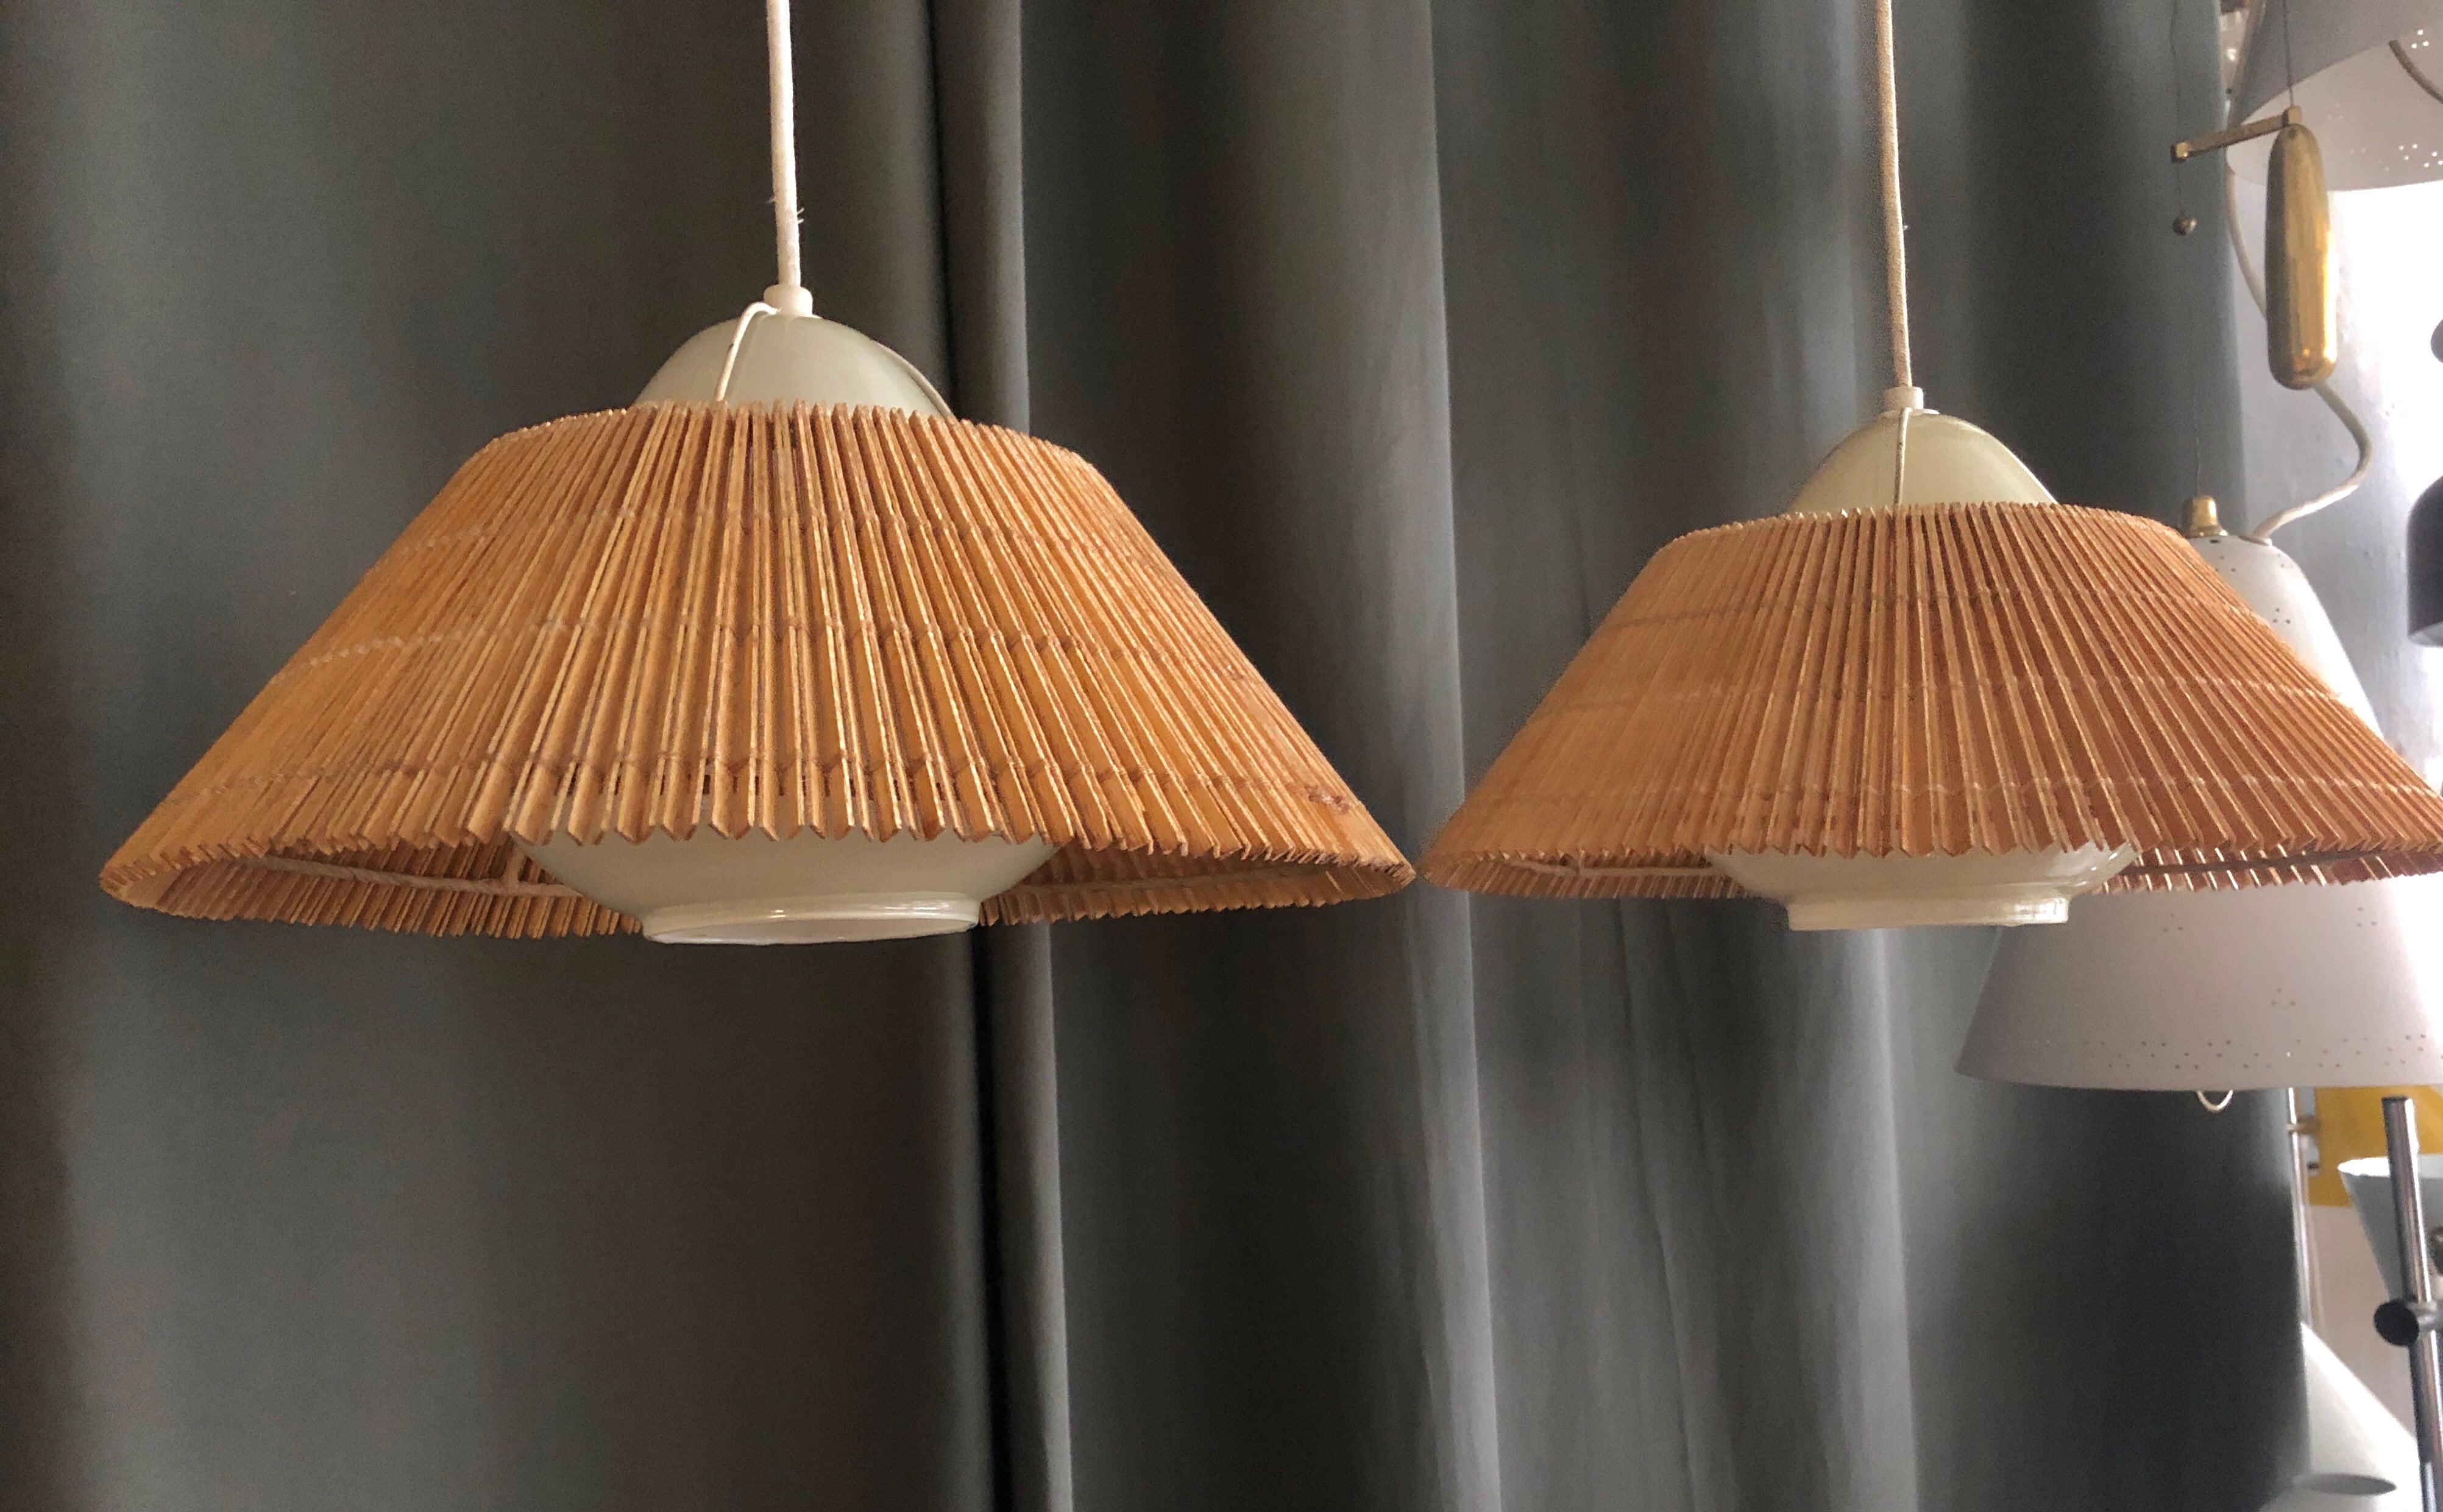 A pair of vintage pendants designed by Lisa Johansson-Pape for Orno, Finland , Circa 1950th. Opaline glass defusers with wooden stripes shades.
Existing wires, rewiring available upon request.
Can be sold separate.